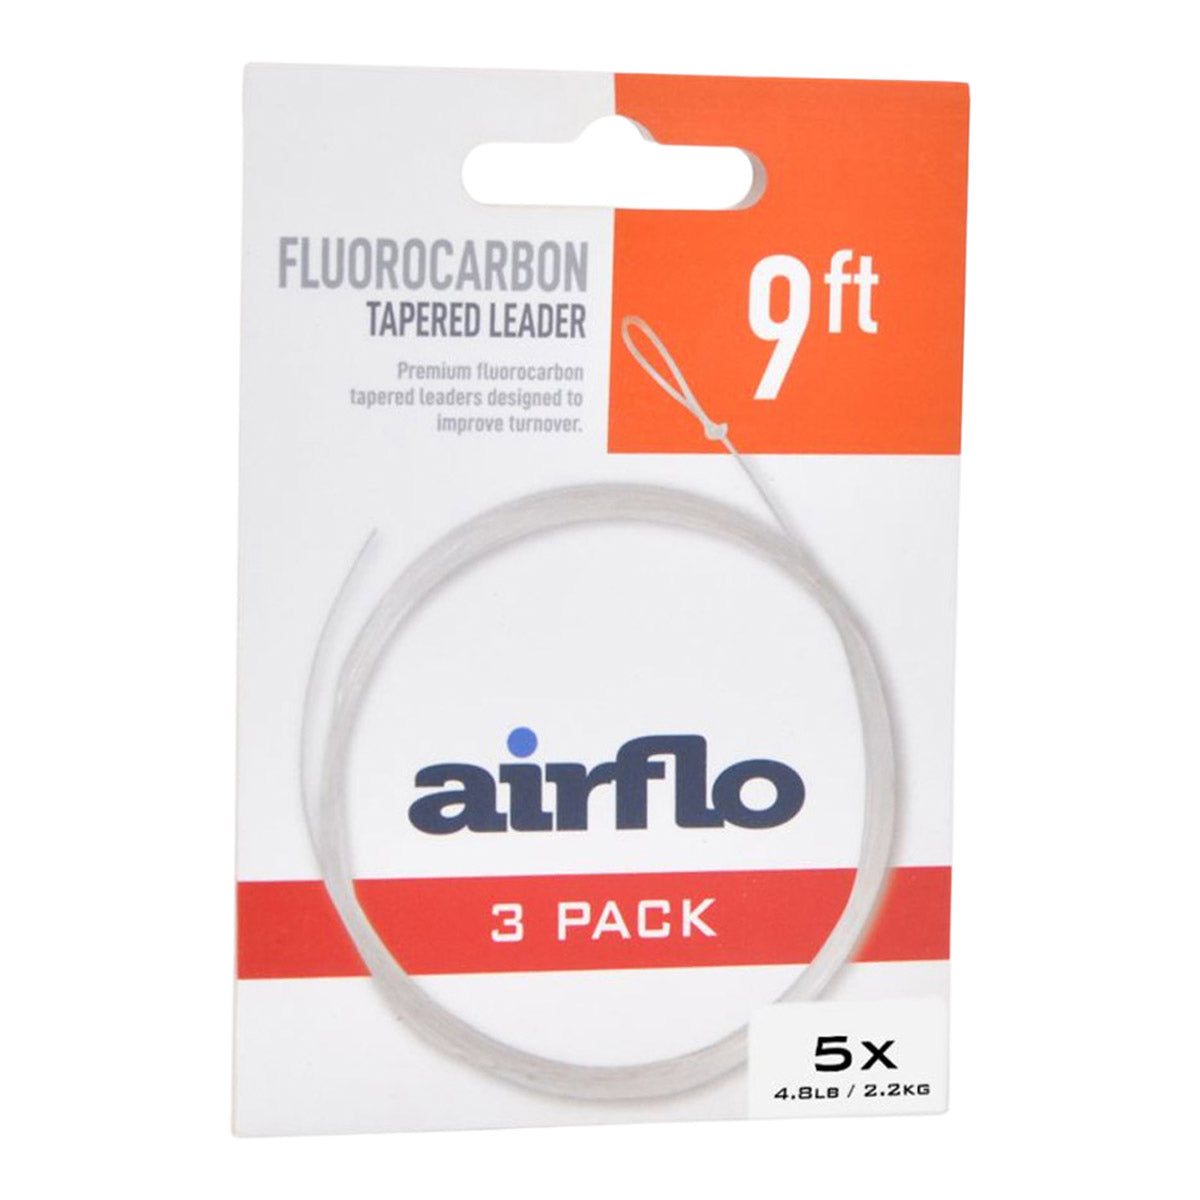 Airflo G5 Fluorocarbon Tapered Leaders (3 Pack)